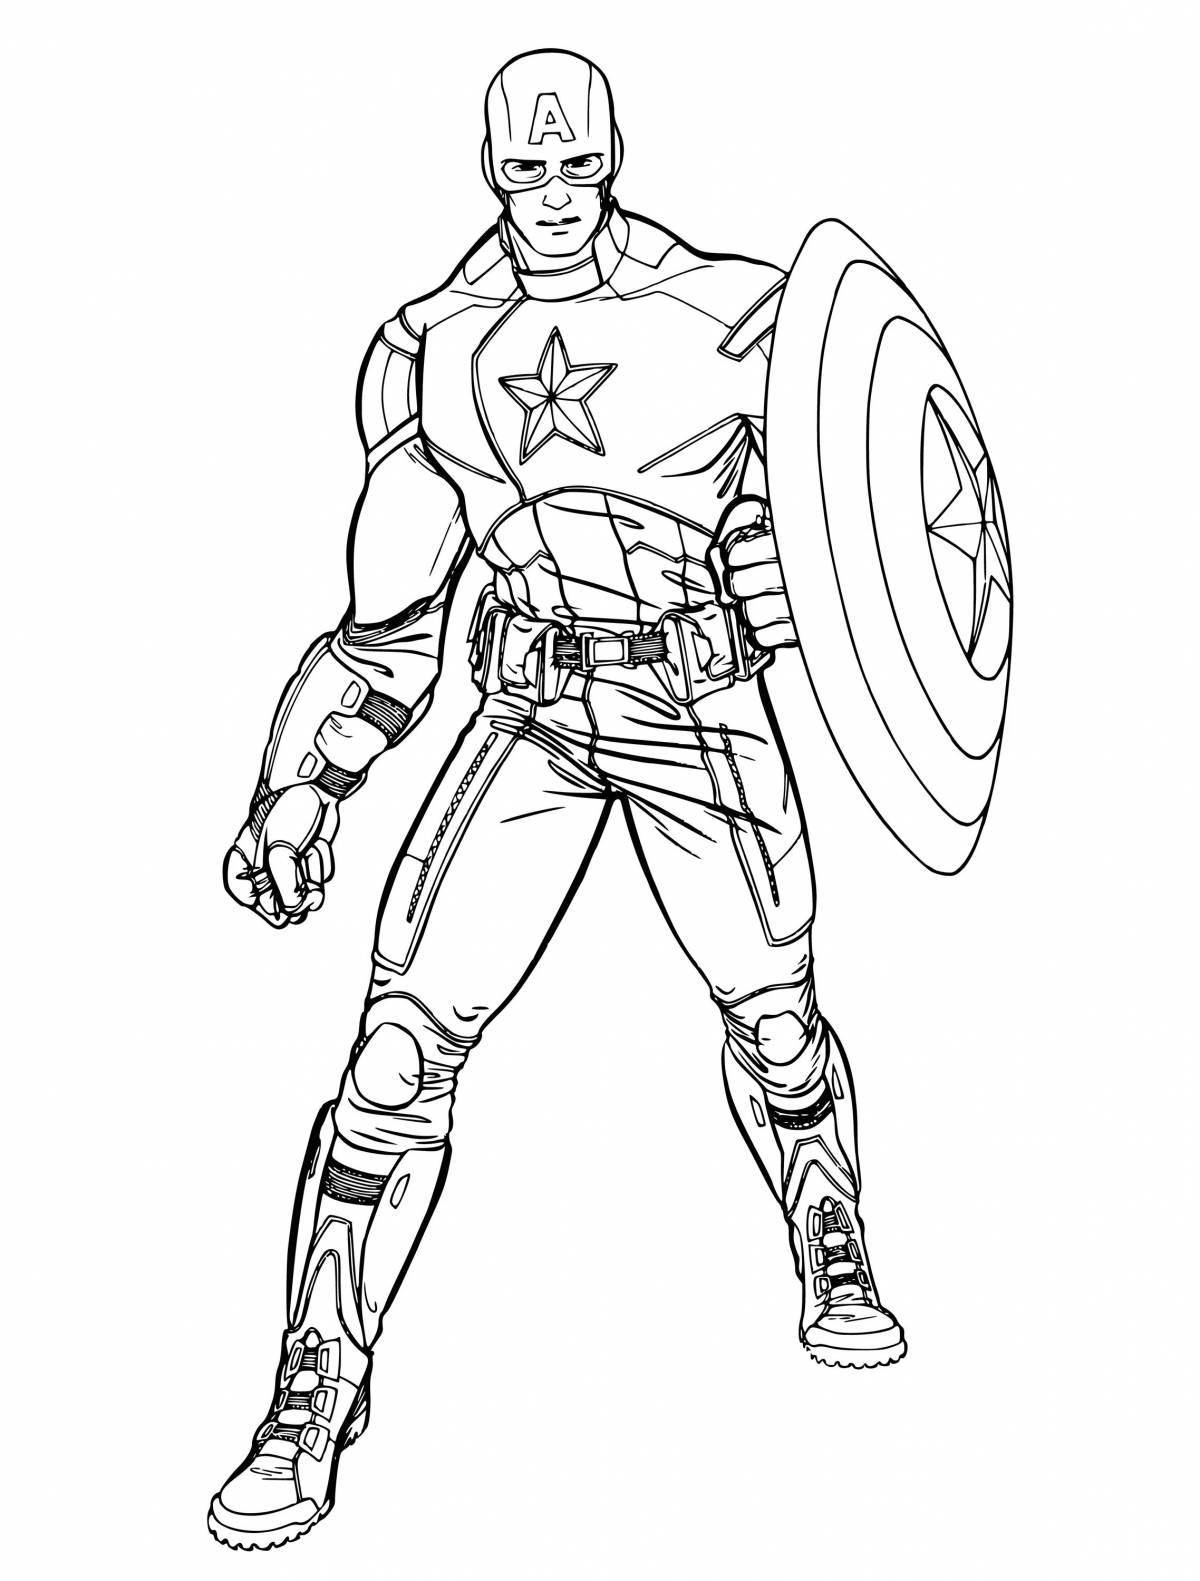 Exalted captain america coloring page